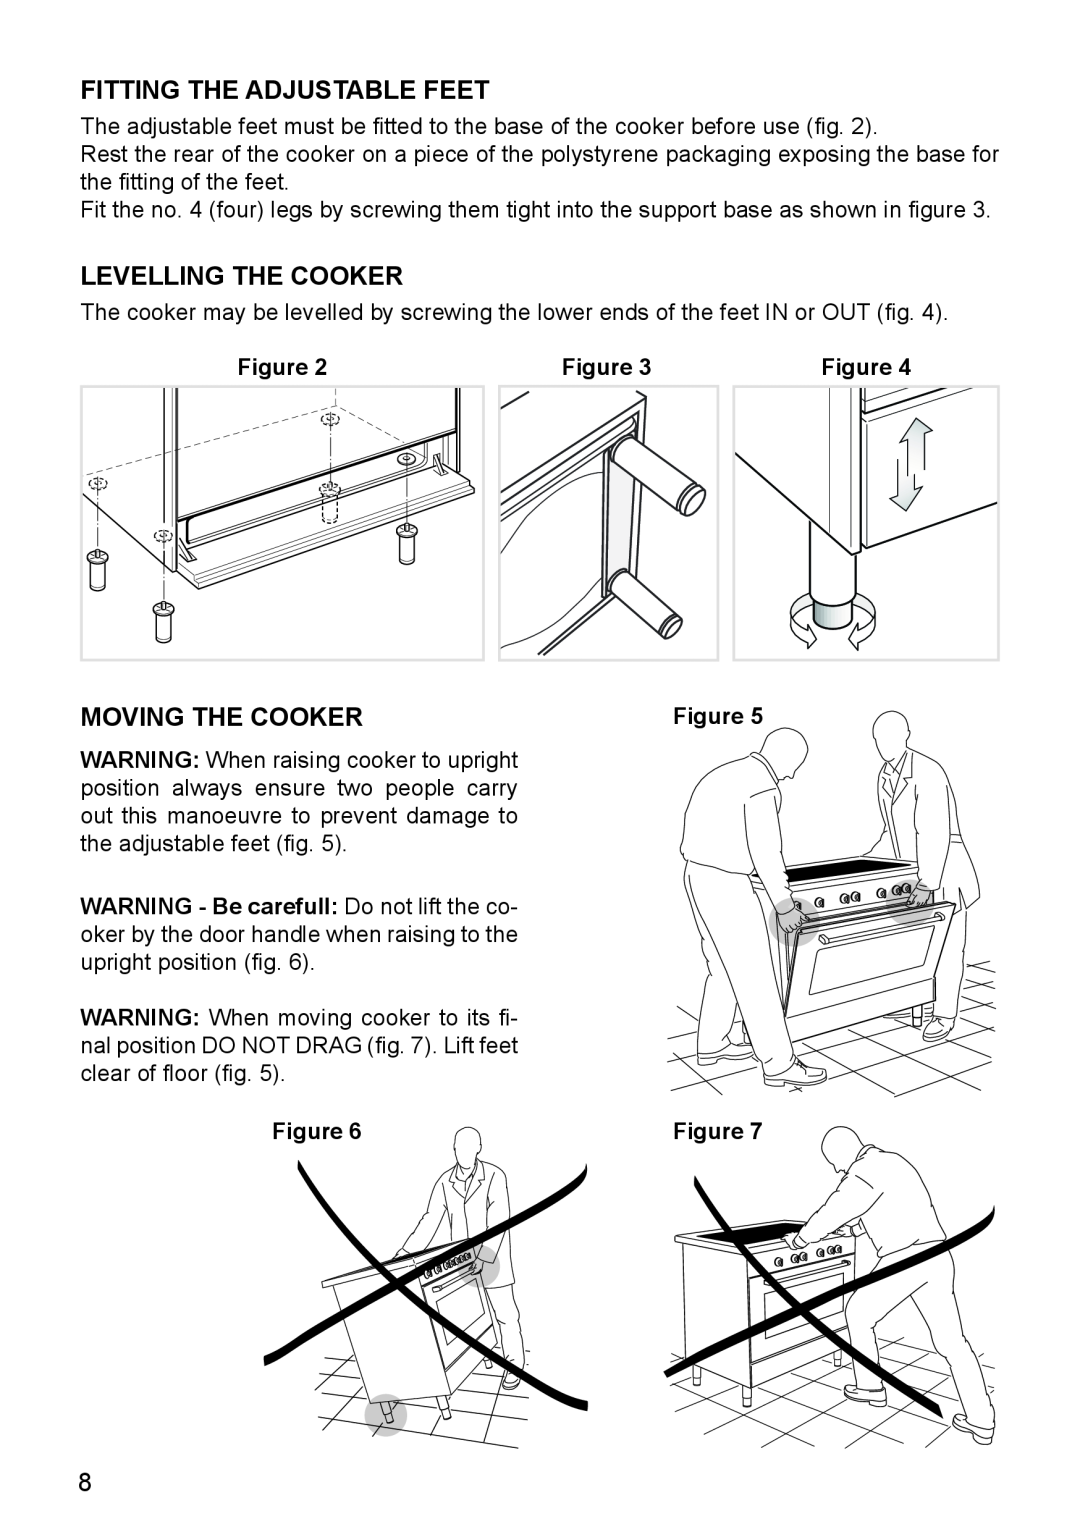 DeLonghi DEF905E manual Fitting The Adjustable Feet, Levelling The Cooker, Moving The Cooker 